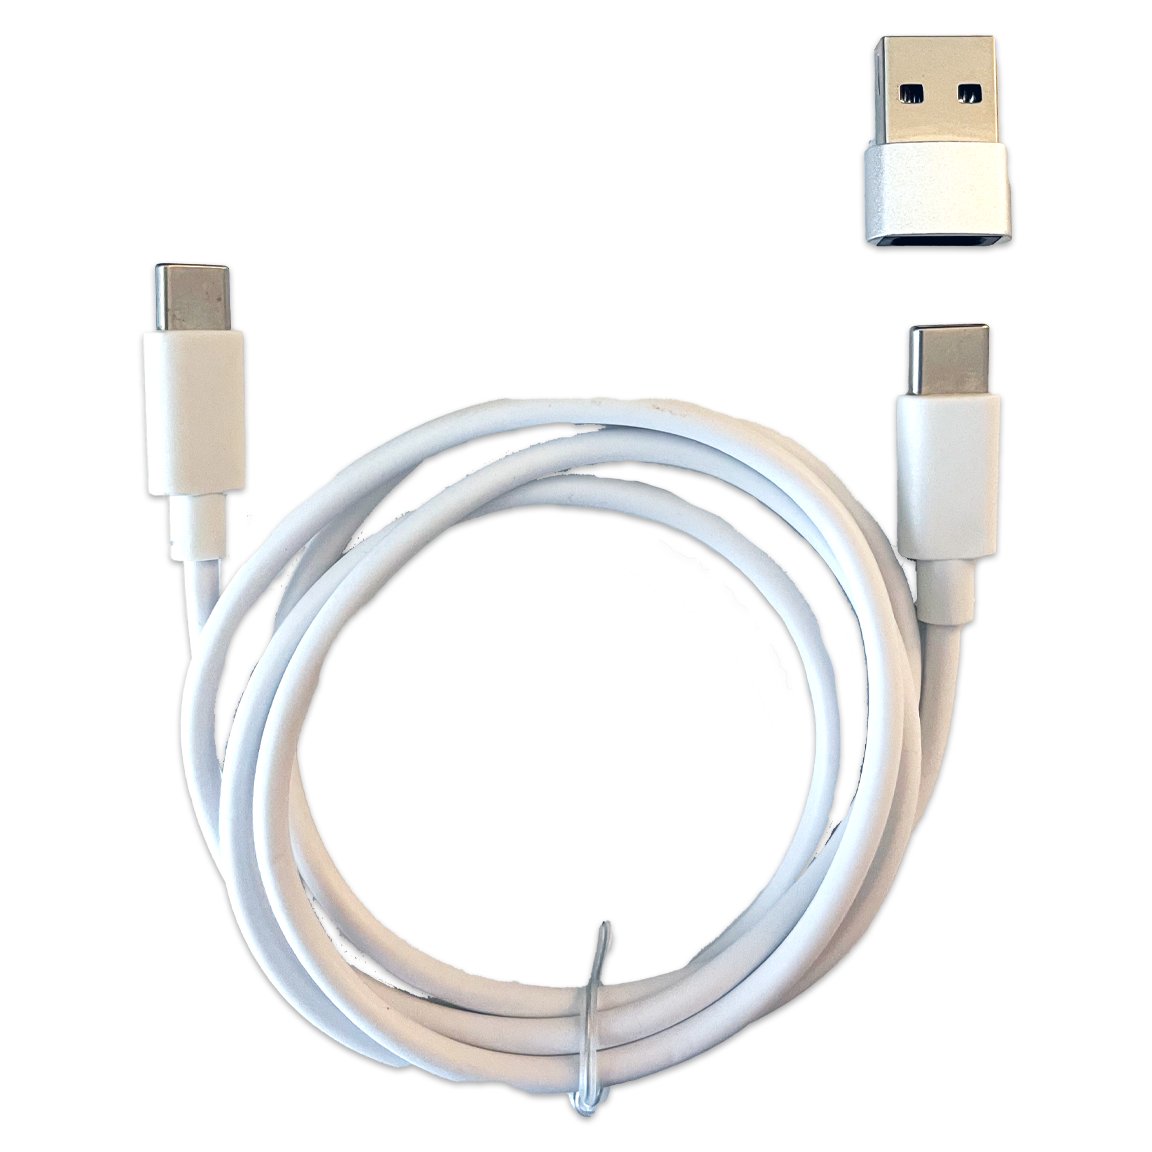 WHOLESALE 3FT USB-C-TO-USB-C CABLE ADAPTER CONVERTER SETS 6 PIECES PER DISPLAY 24835